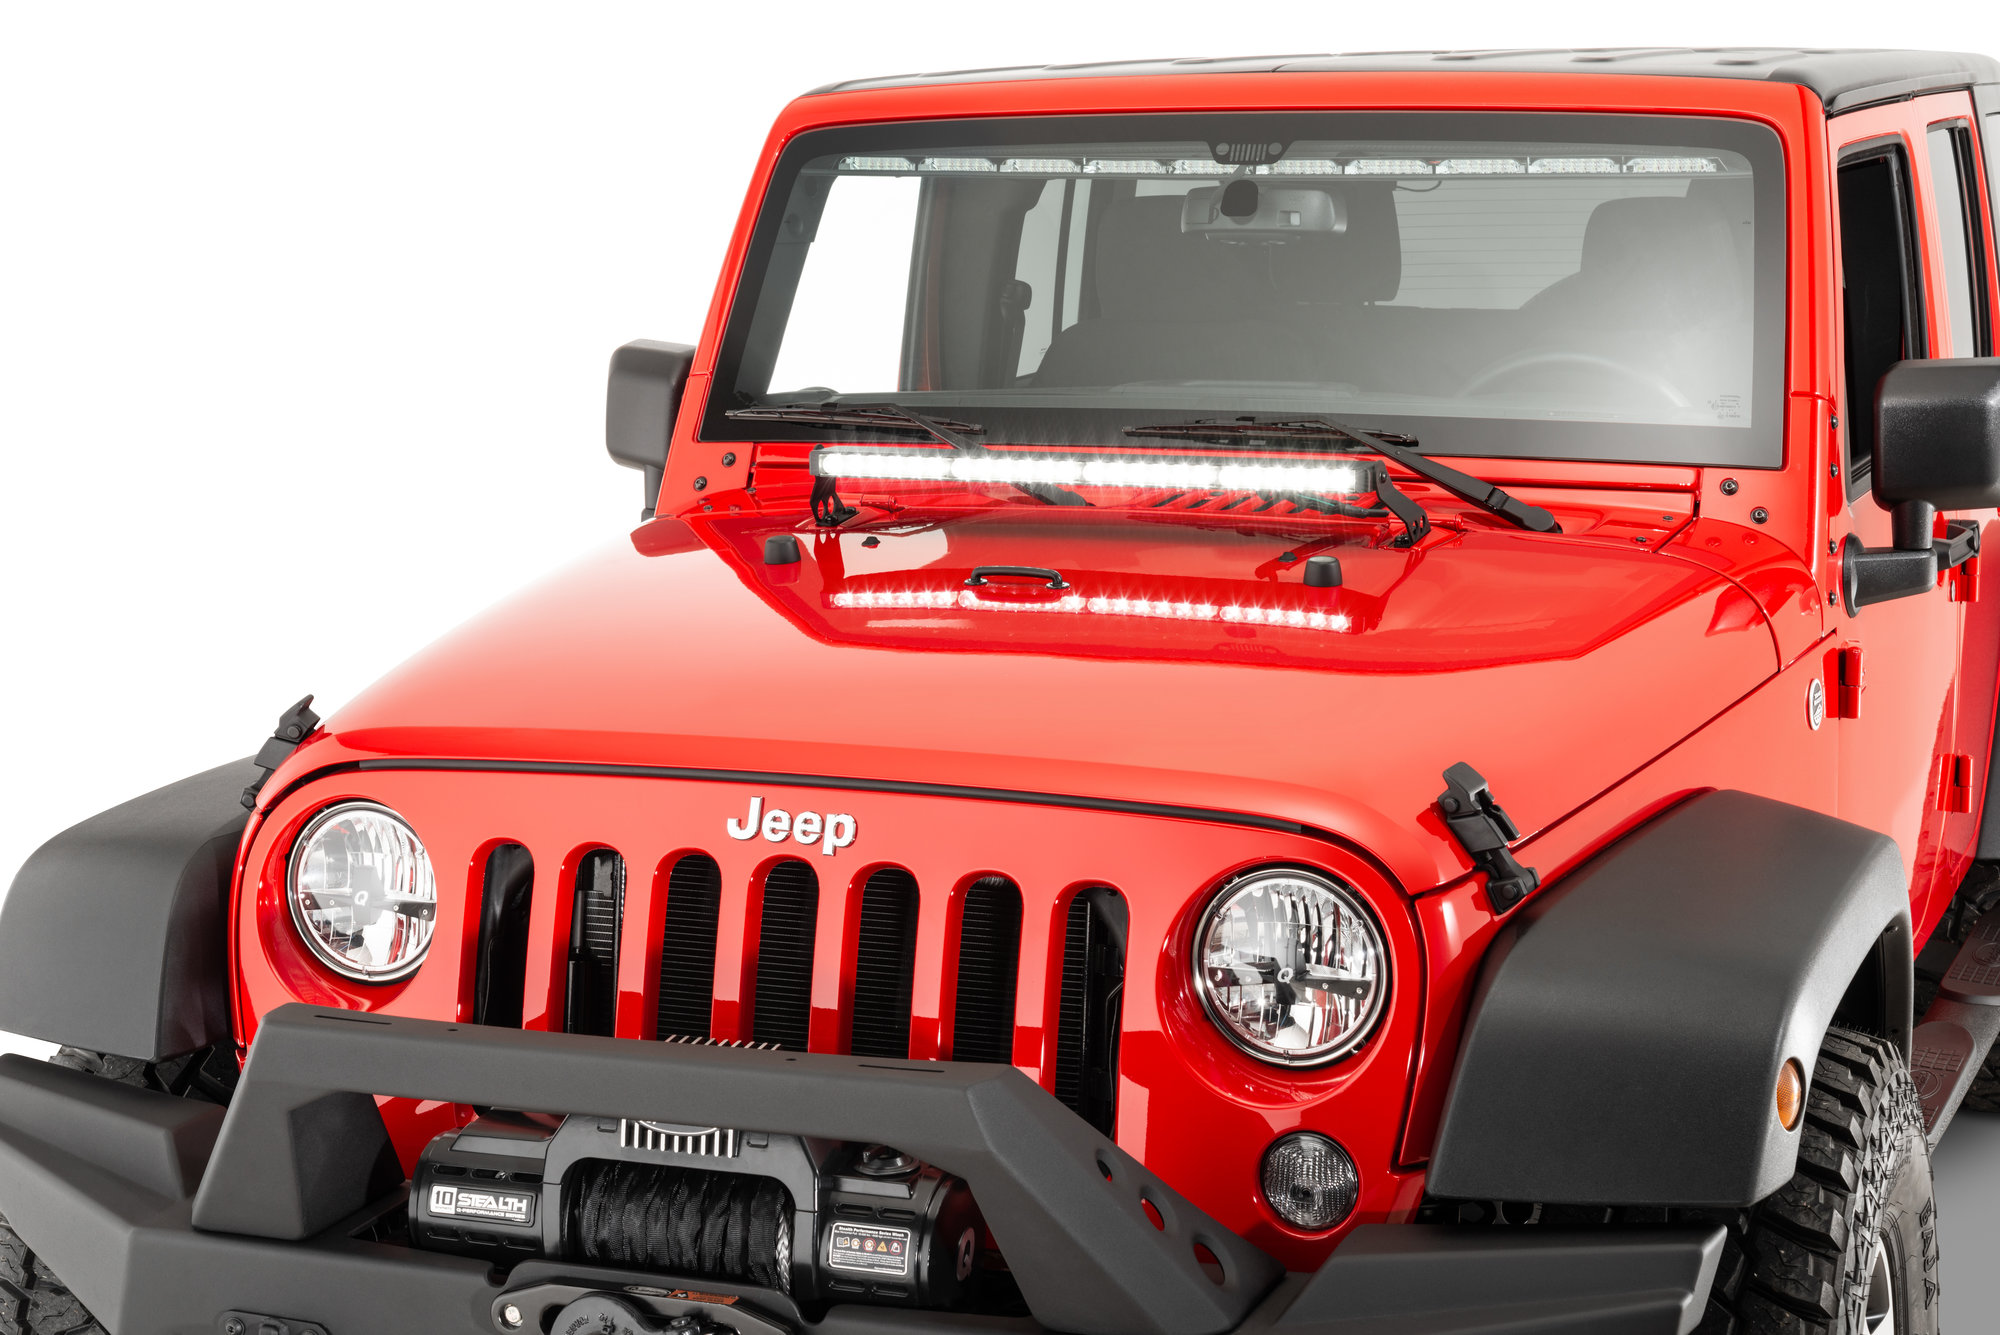 https://www.quadratec.com/sites/default/files/styles/product_zoomed/public/product_images/quadratec-stealth-27-inch-led-light-bar-hood-mounted-wrangler-jk-installed-bright.jpg